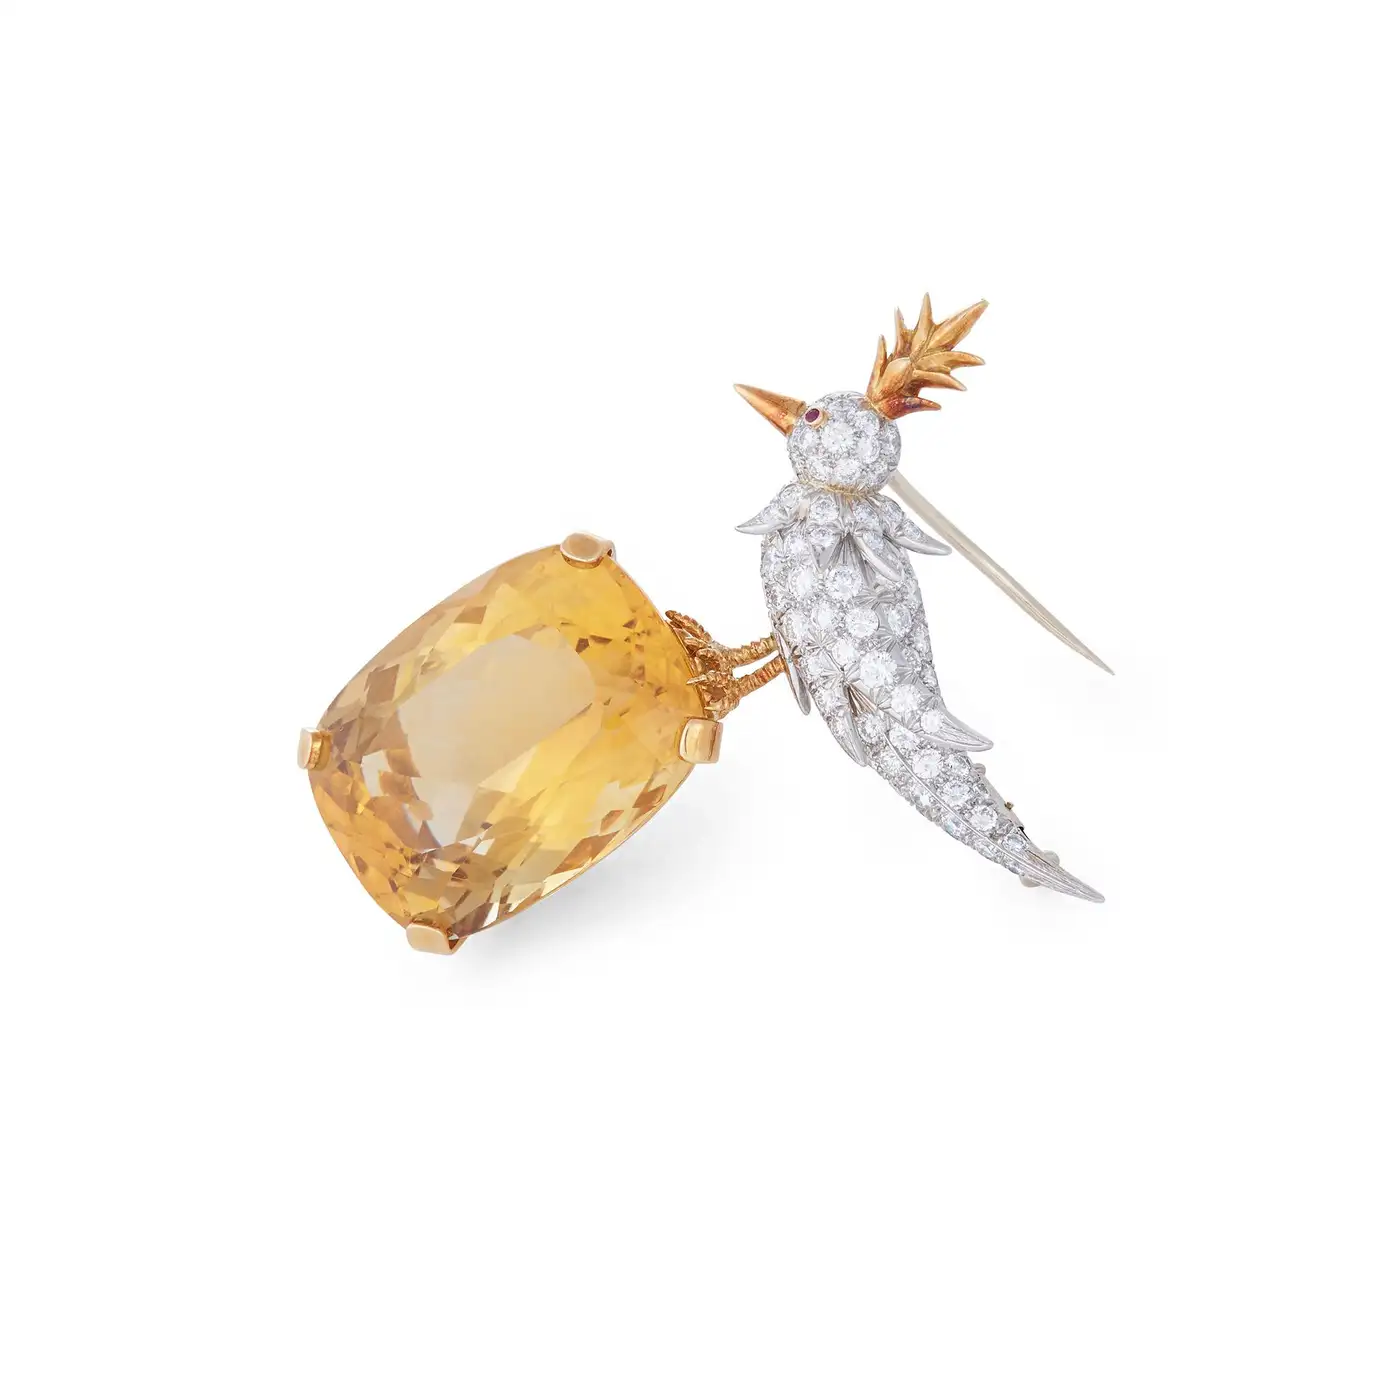 Bird-on-a-Rock-Citrine-and-Diamond-Brooch-Jean-Schlumberger-for-Tiffany-Co-6.webp